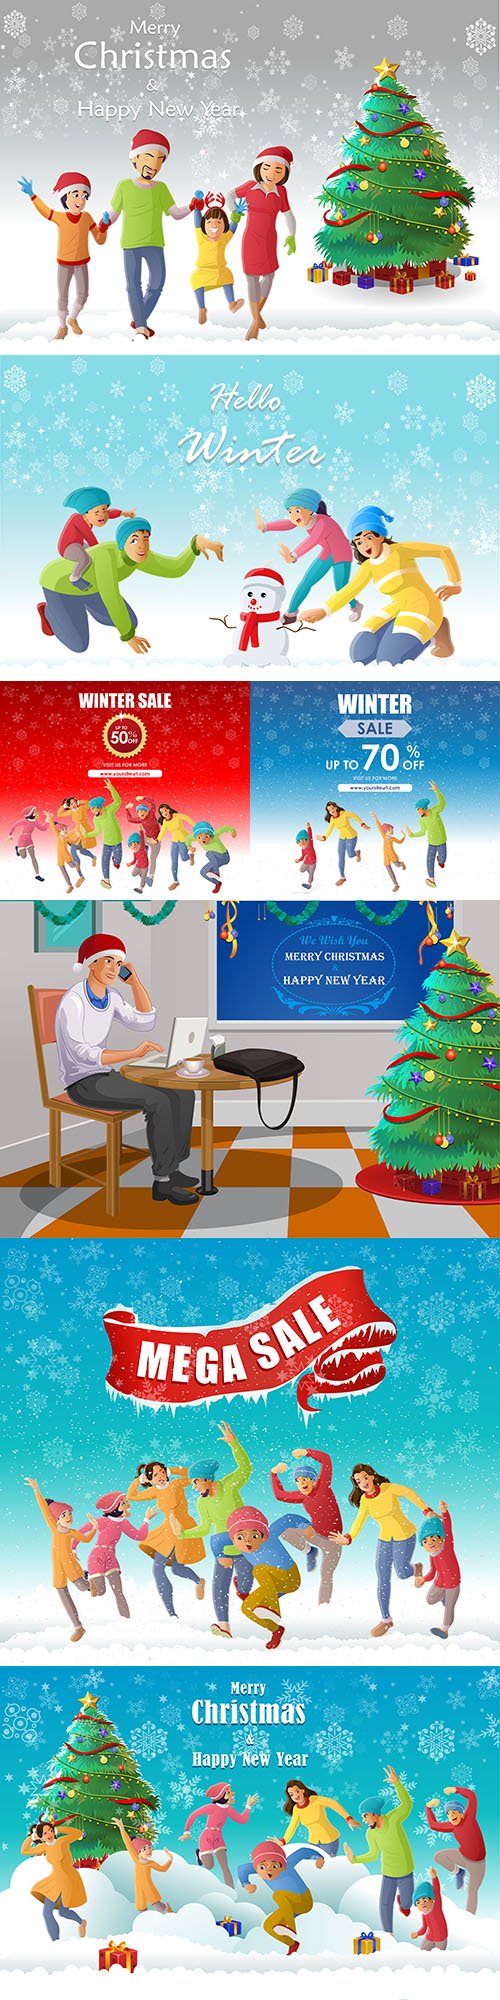 Merry Christmas happy family background illustrations 2